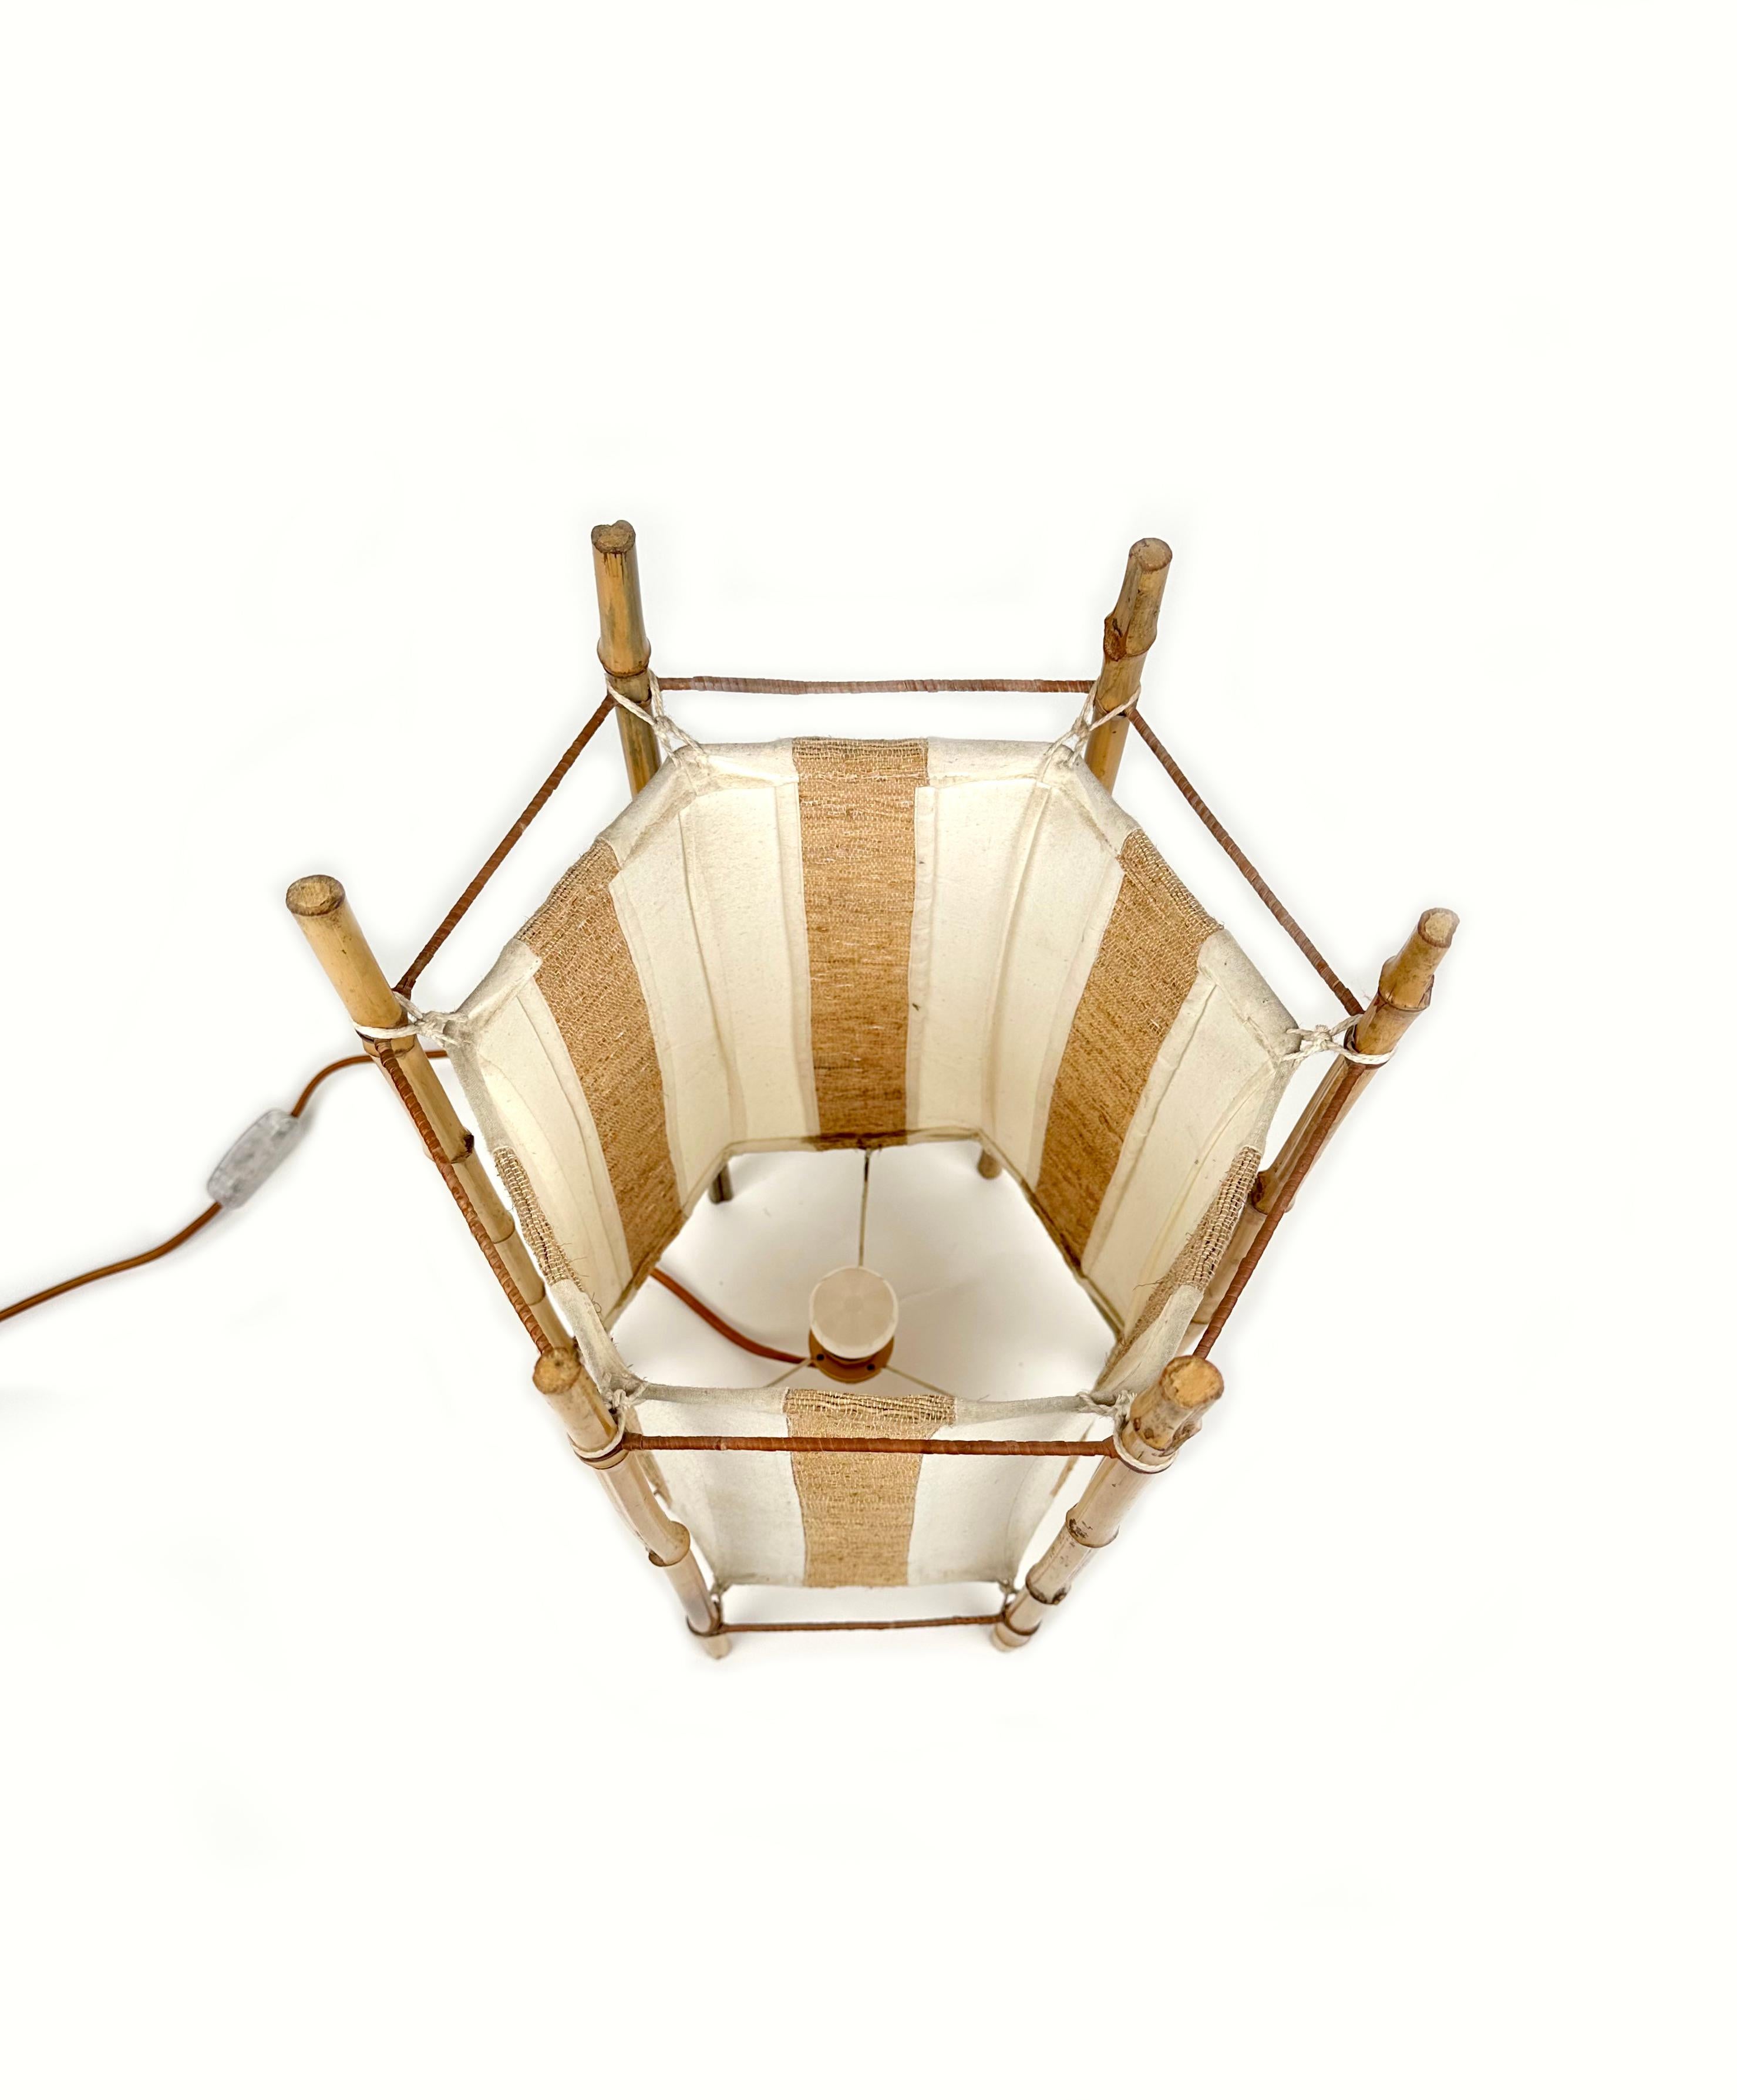 Bamboo, Rattan and Cotton Table or Floor Lamp Louis Sognot style, Italy 1960s For Sale 1